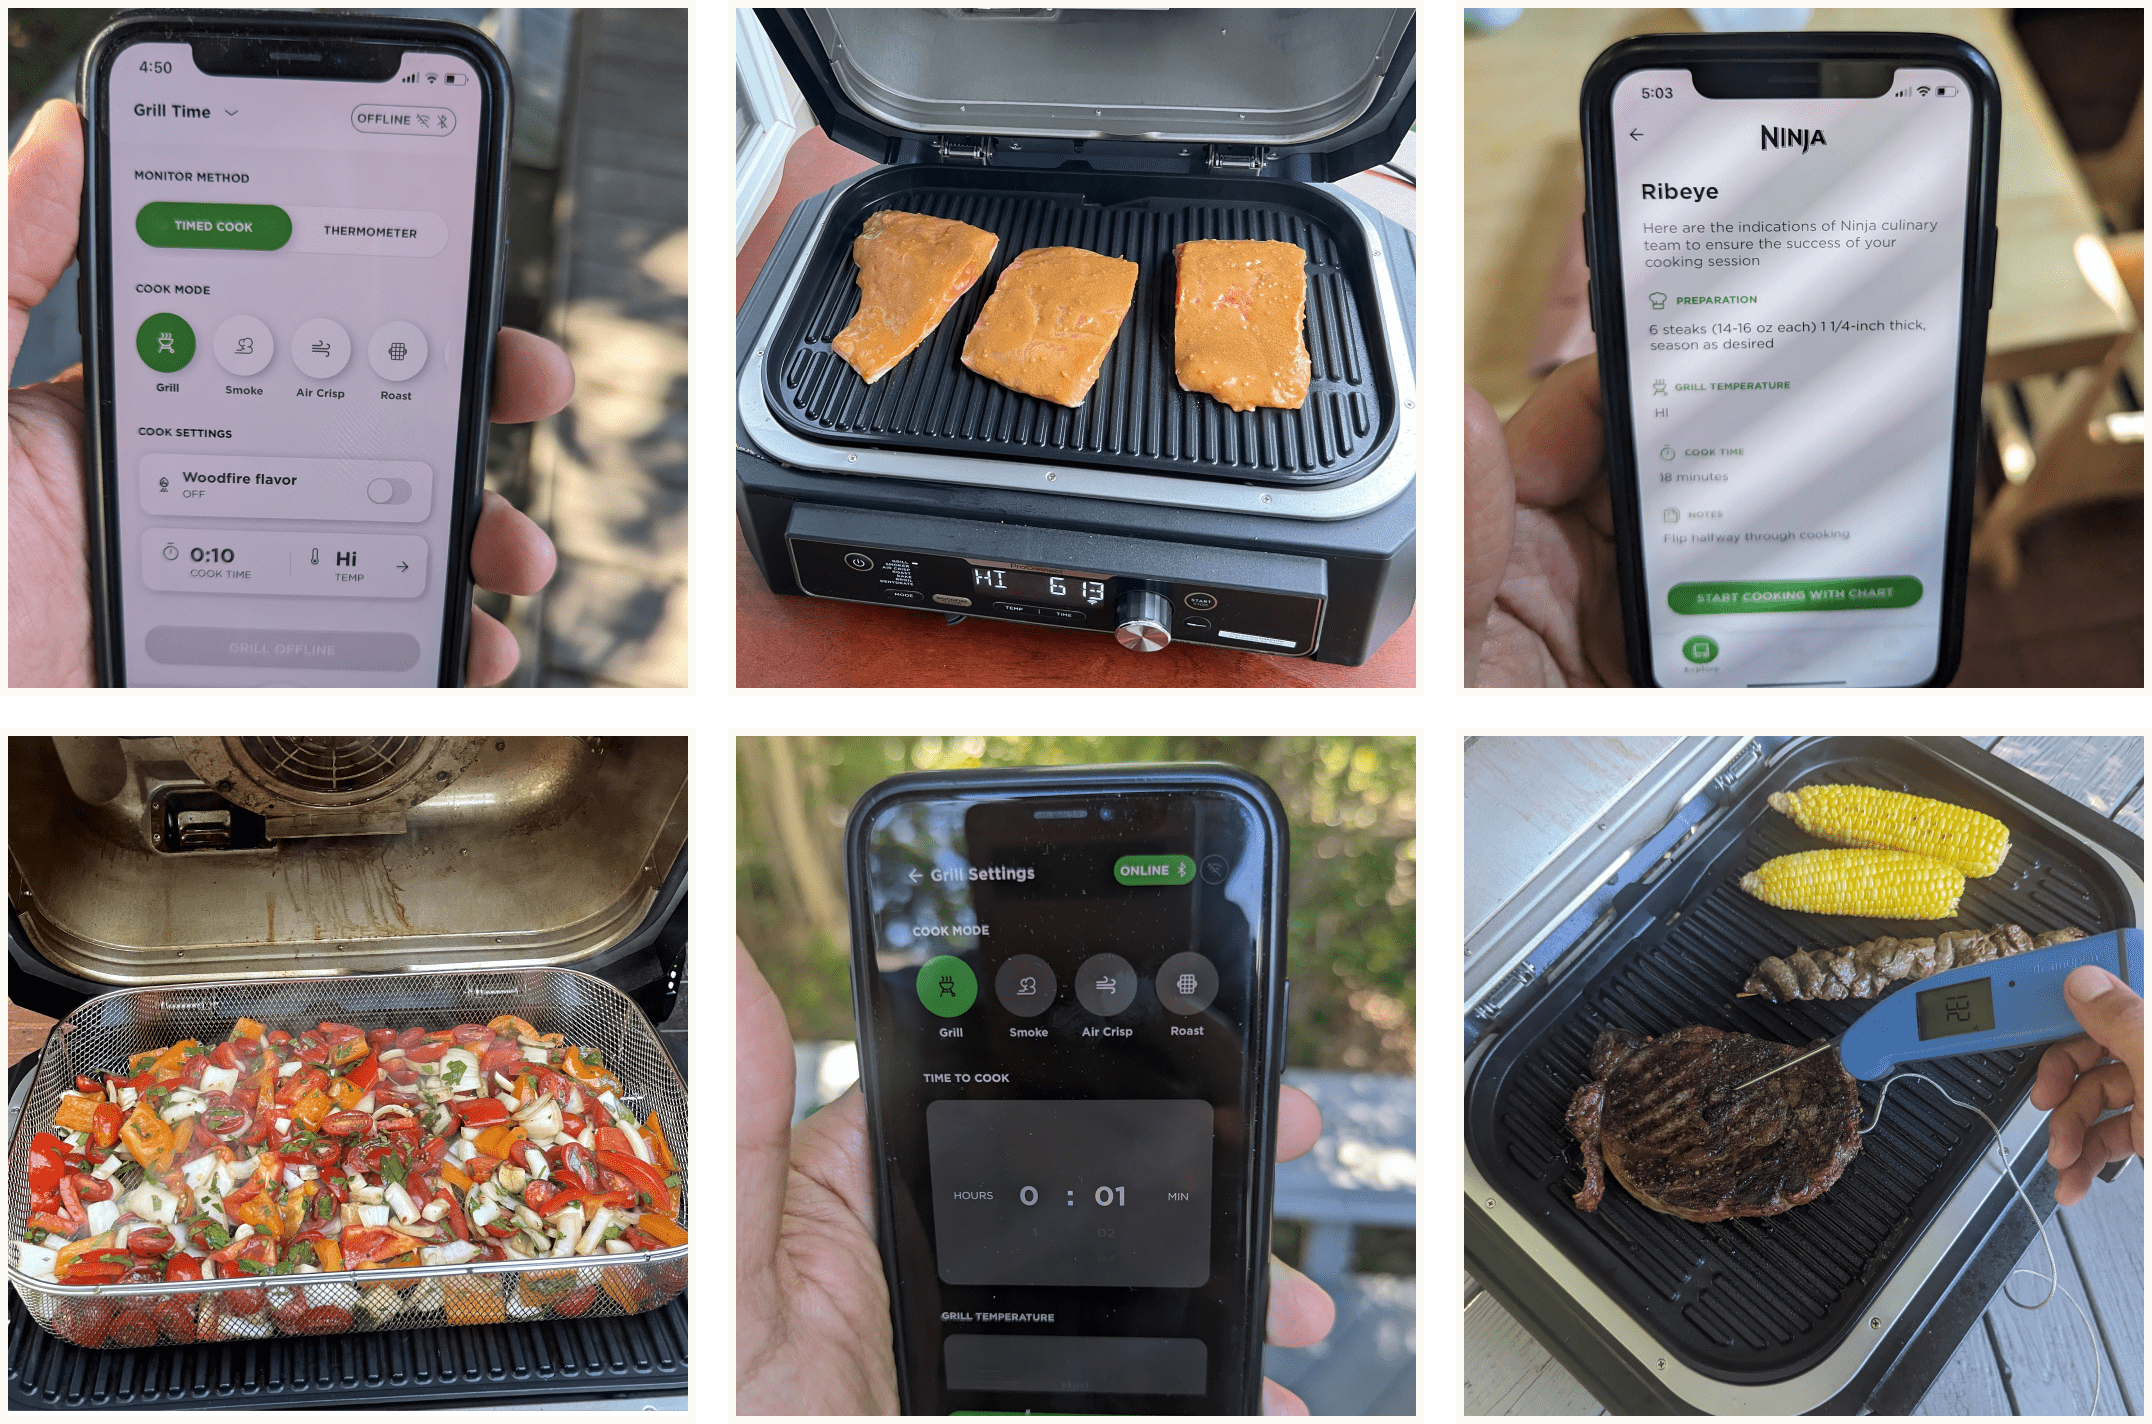 Collage of images from our testing of the ninja pro connect app and grill.